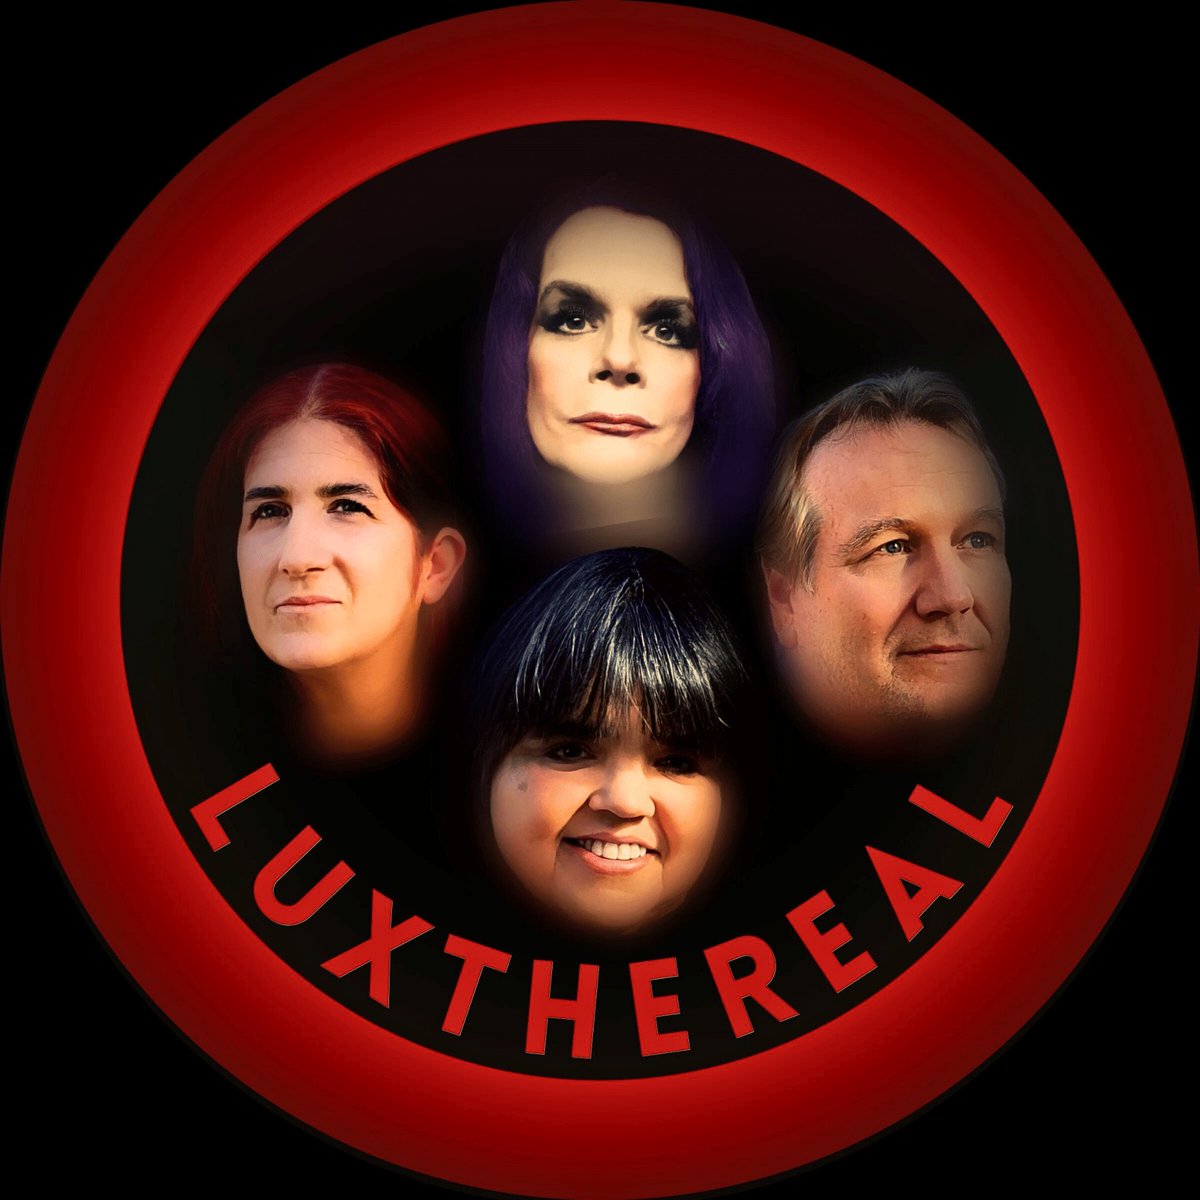 Now Playing on SMOOTH EASY HITS - 'Sharon (Original Version)' by Luxthereal. 
Listen at mytuner-radio.com/radio/smooth-e…
@luxthereal1
#TrendingNow